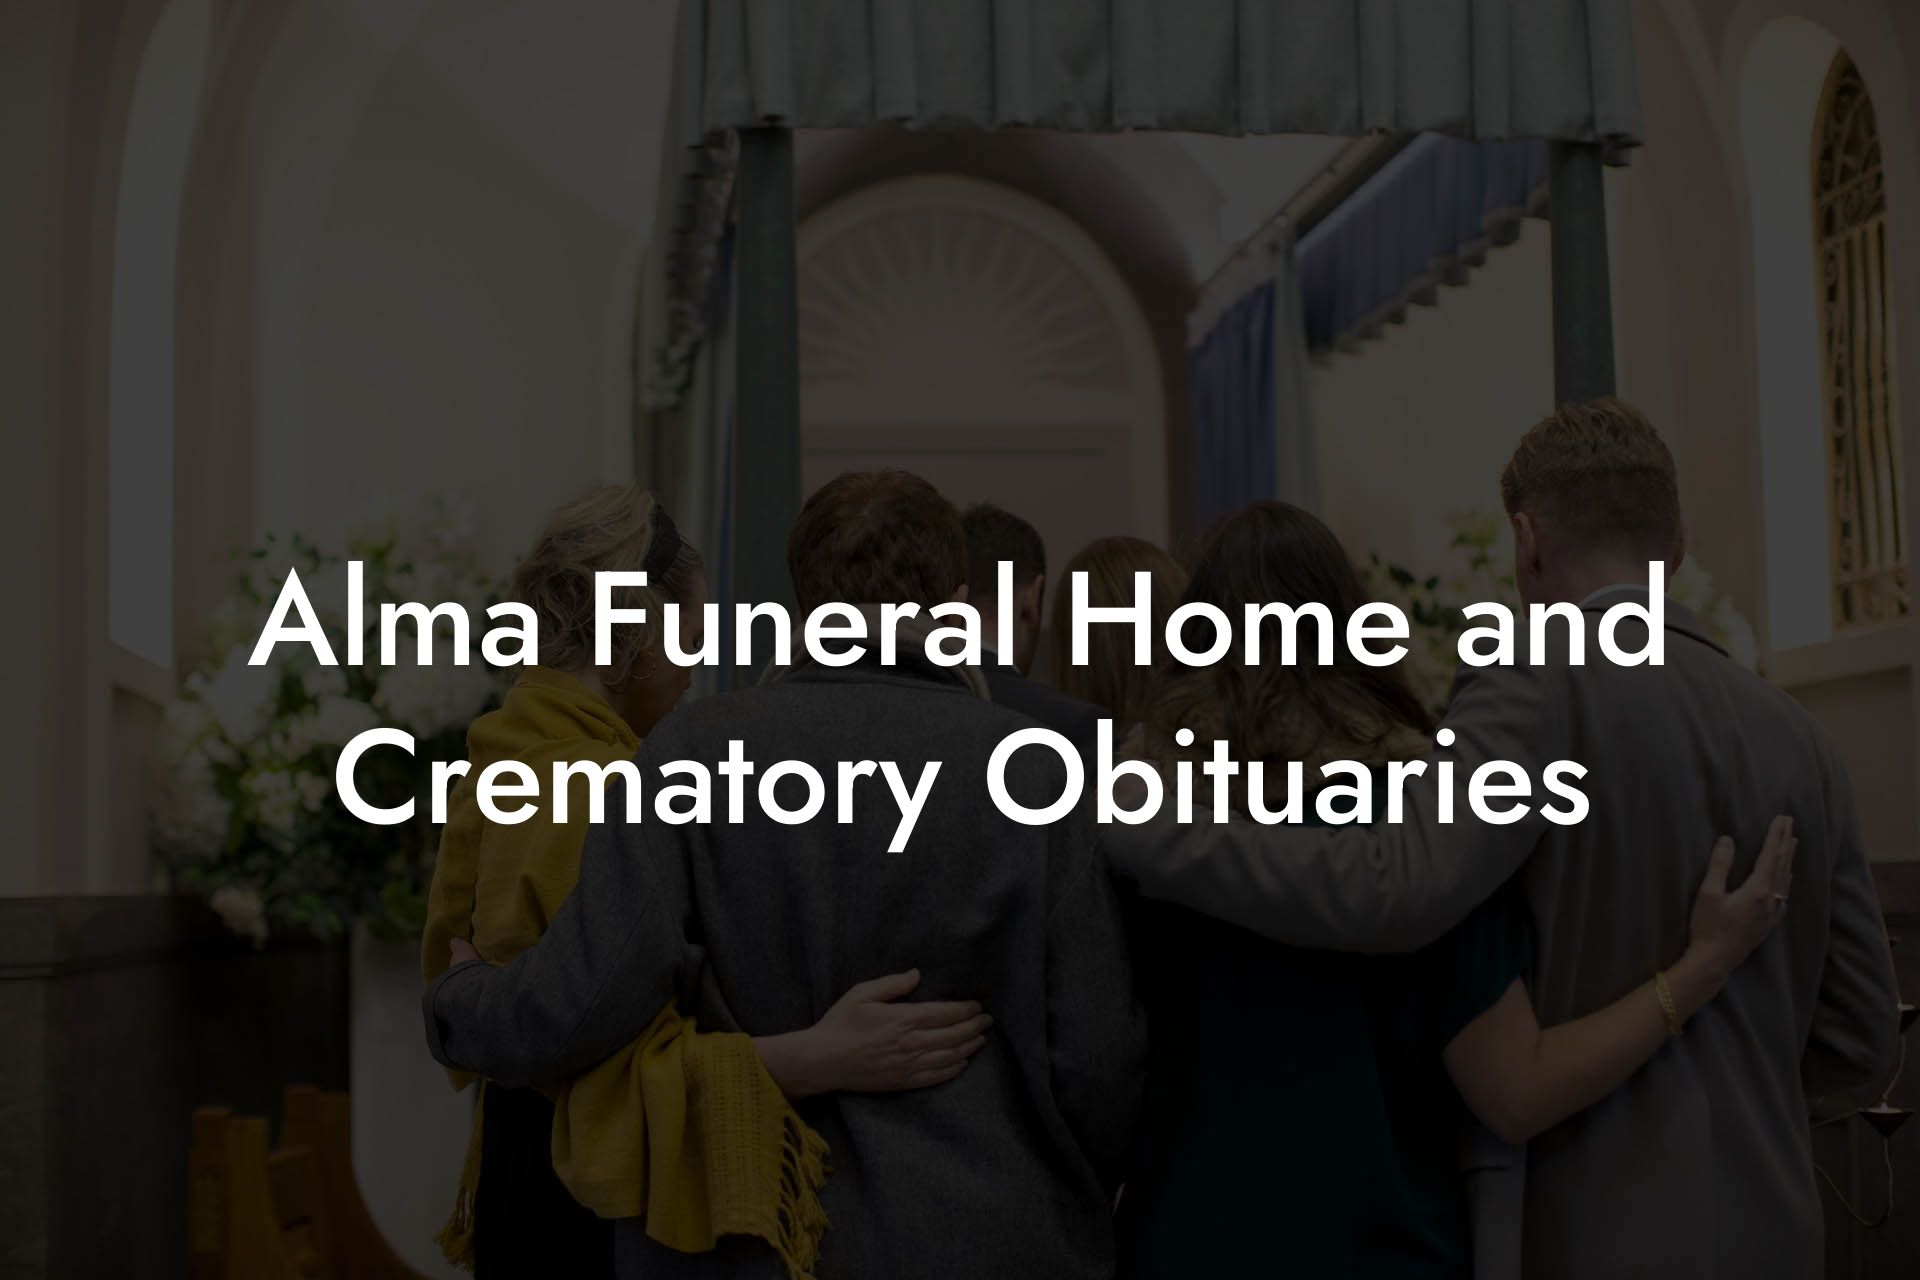 Alma Funeral Home and Crematory Obituaries